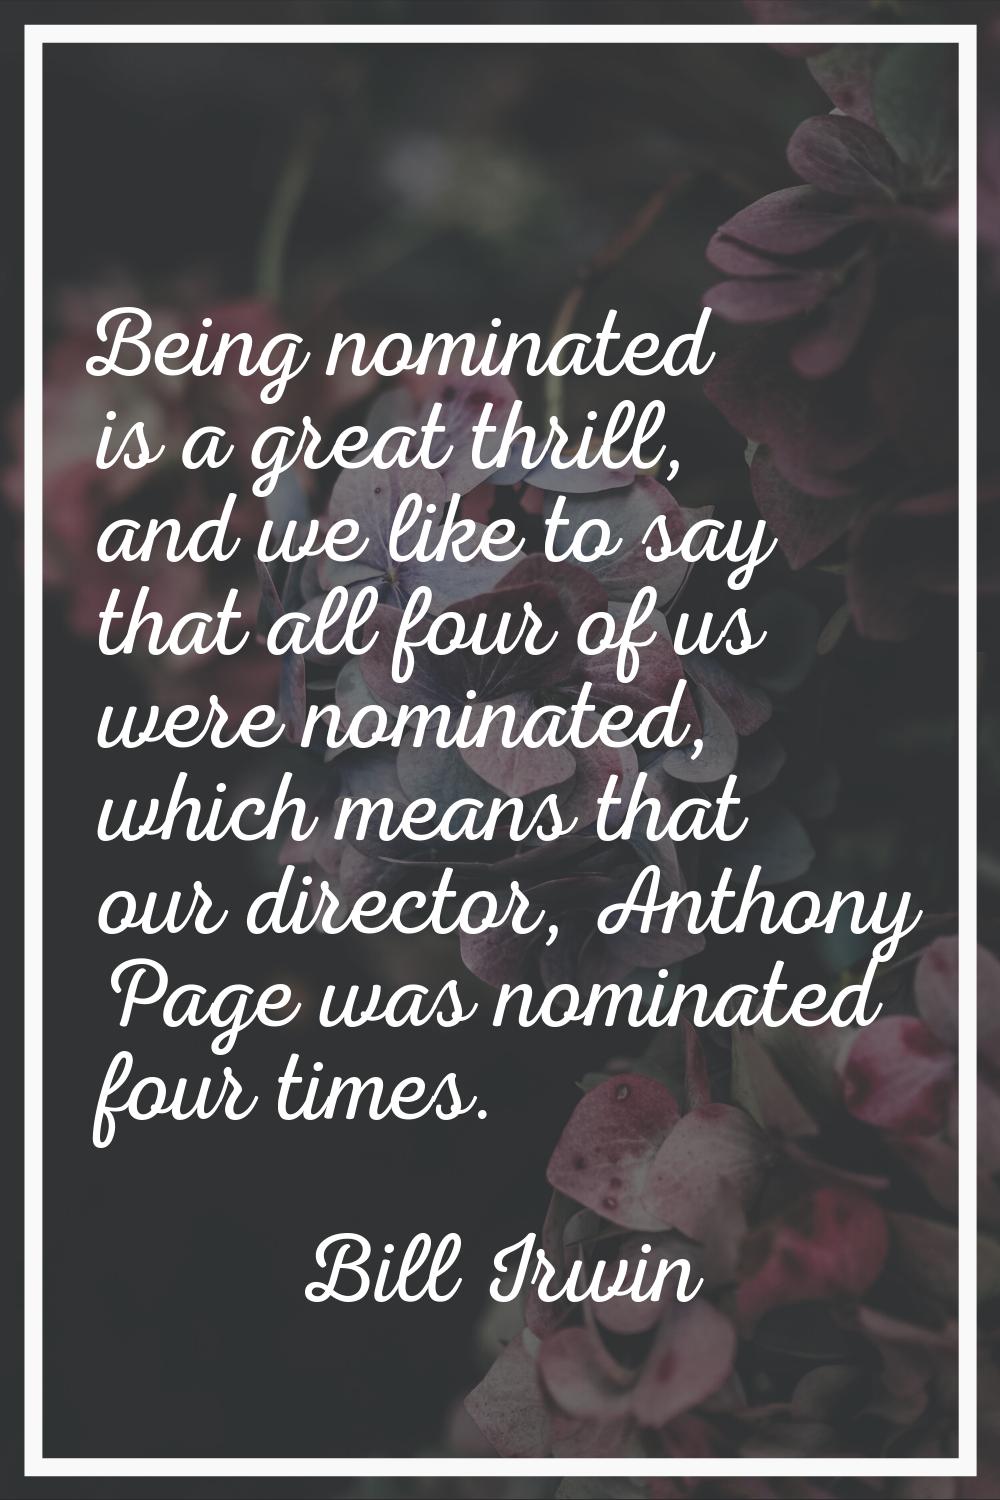 Being nominated is a great thrill, and we like to say that all four of us were nominated, which mea